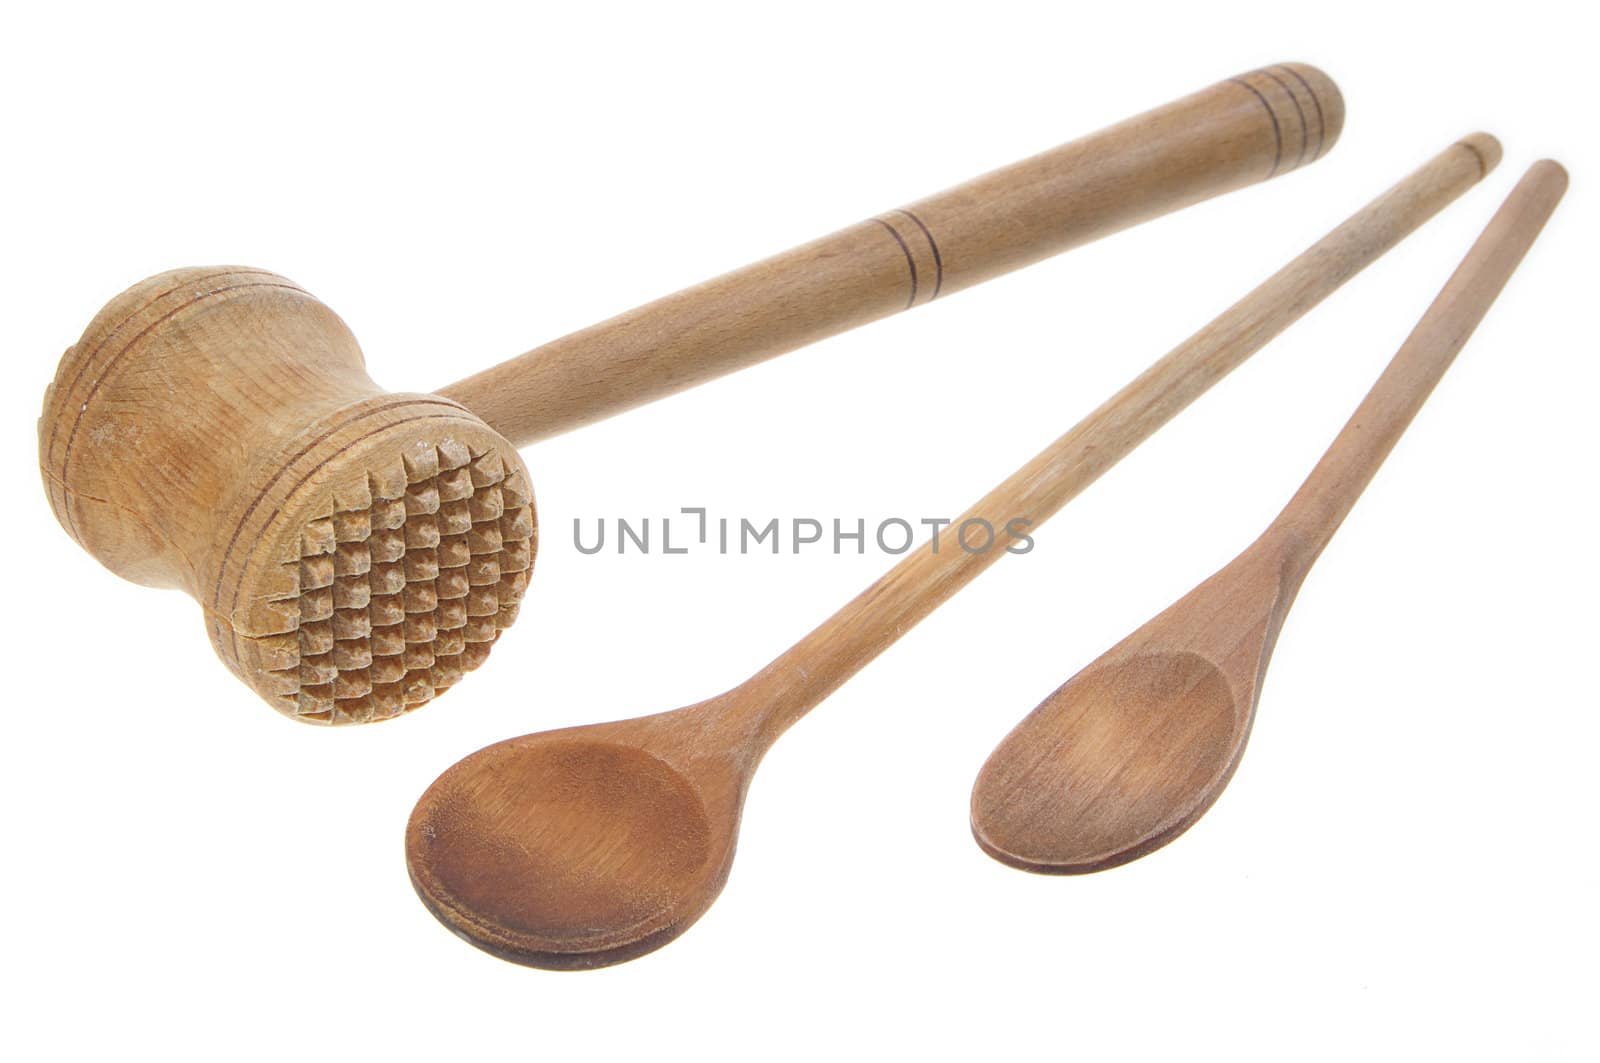 Mallet and two wooden spoons by dyoma